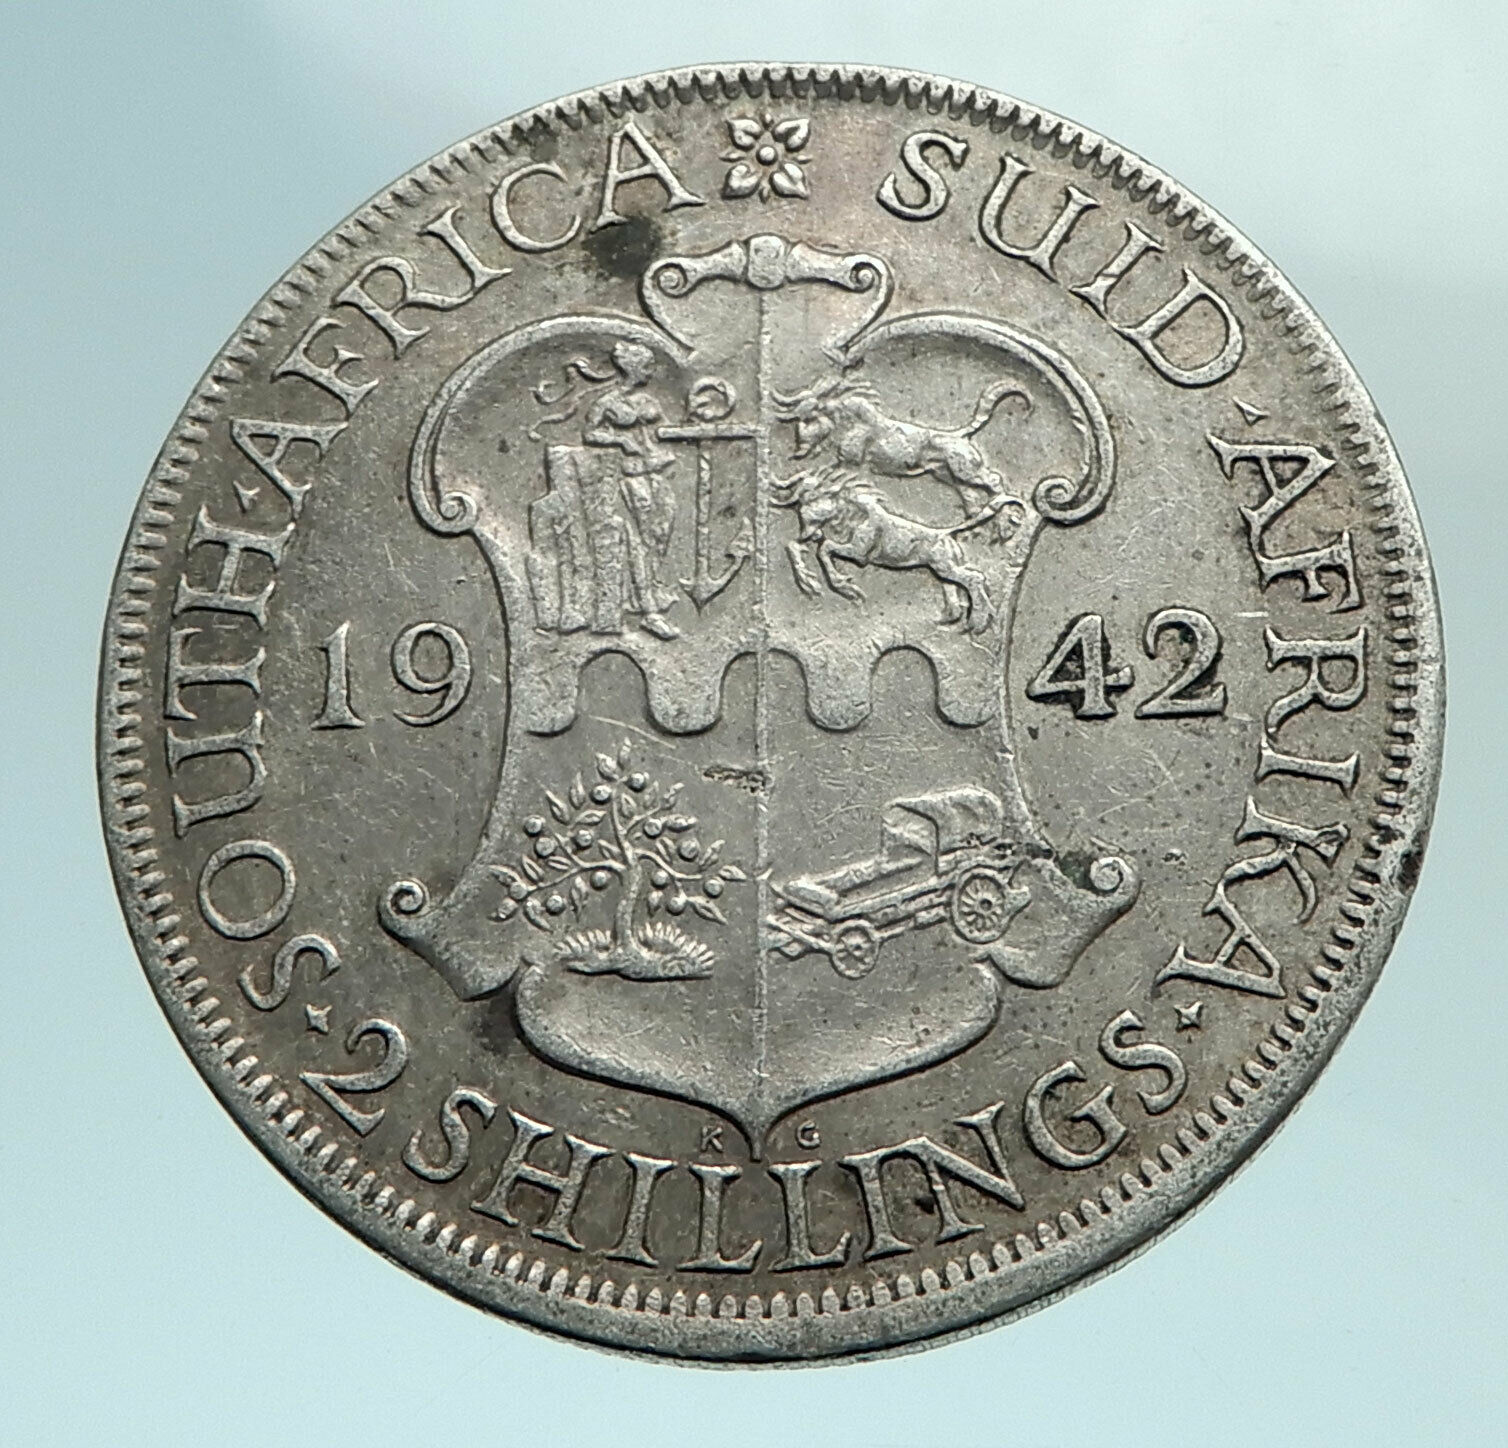 1942 SOUTH AFRICA Large GEORGE VI Shields Genuine Silver 2 Shillings Coin i79579